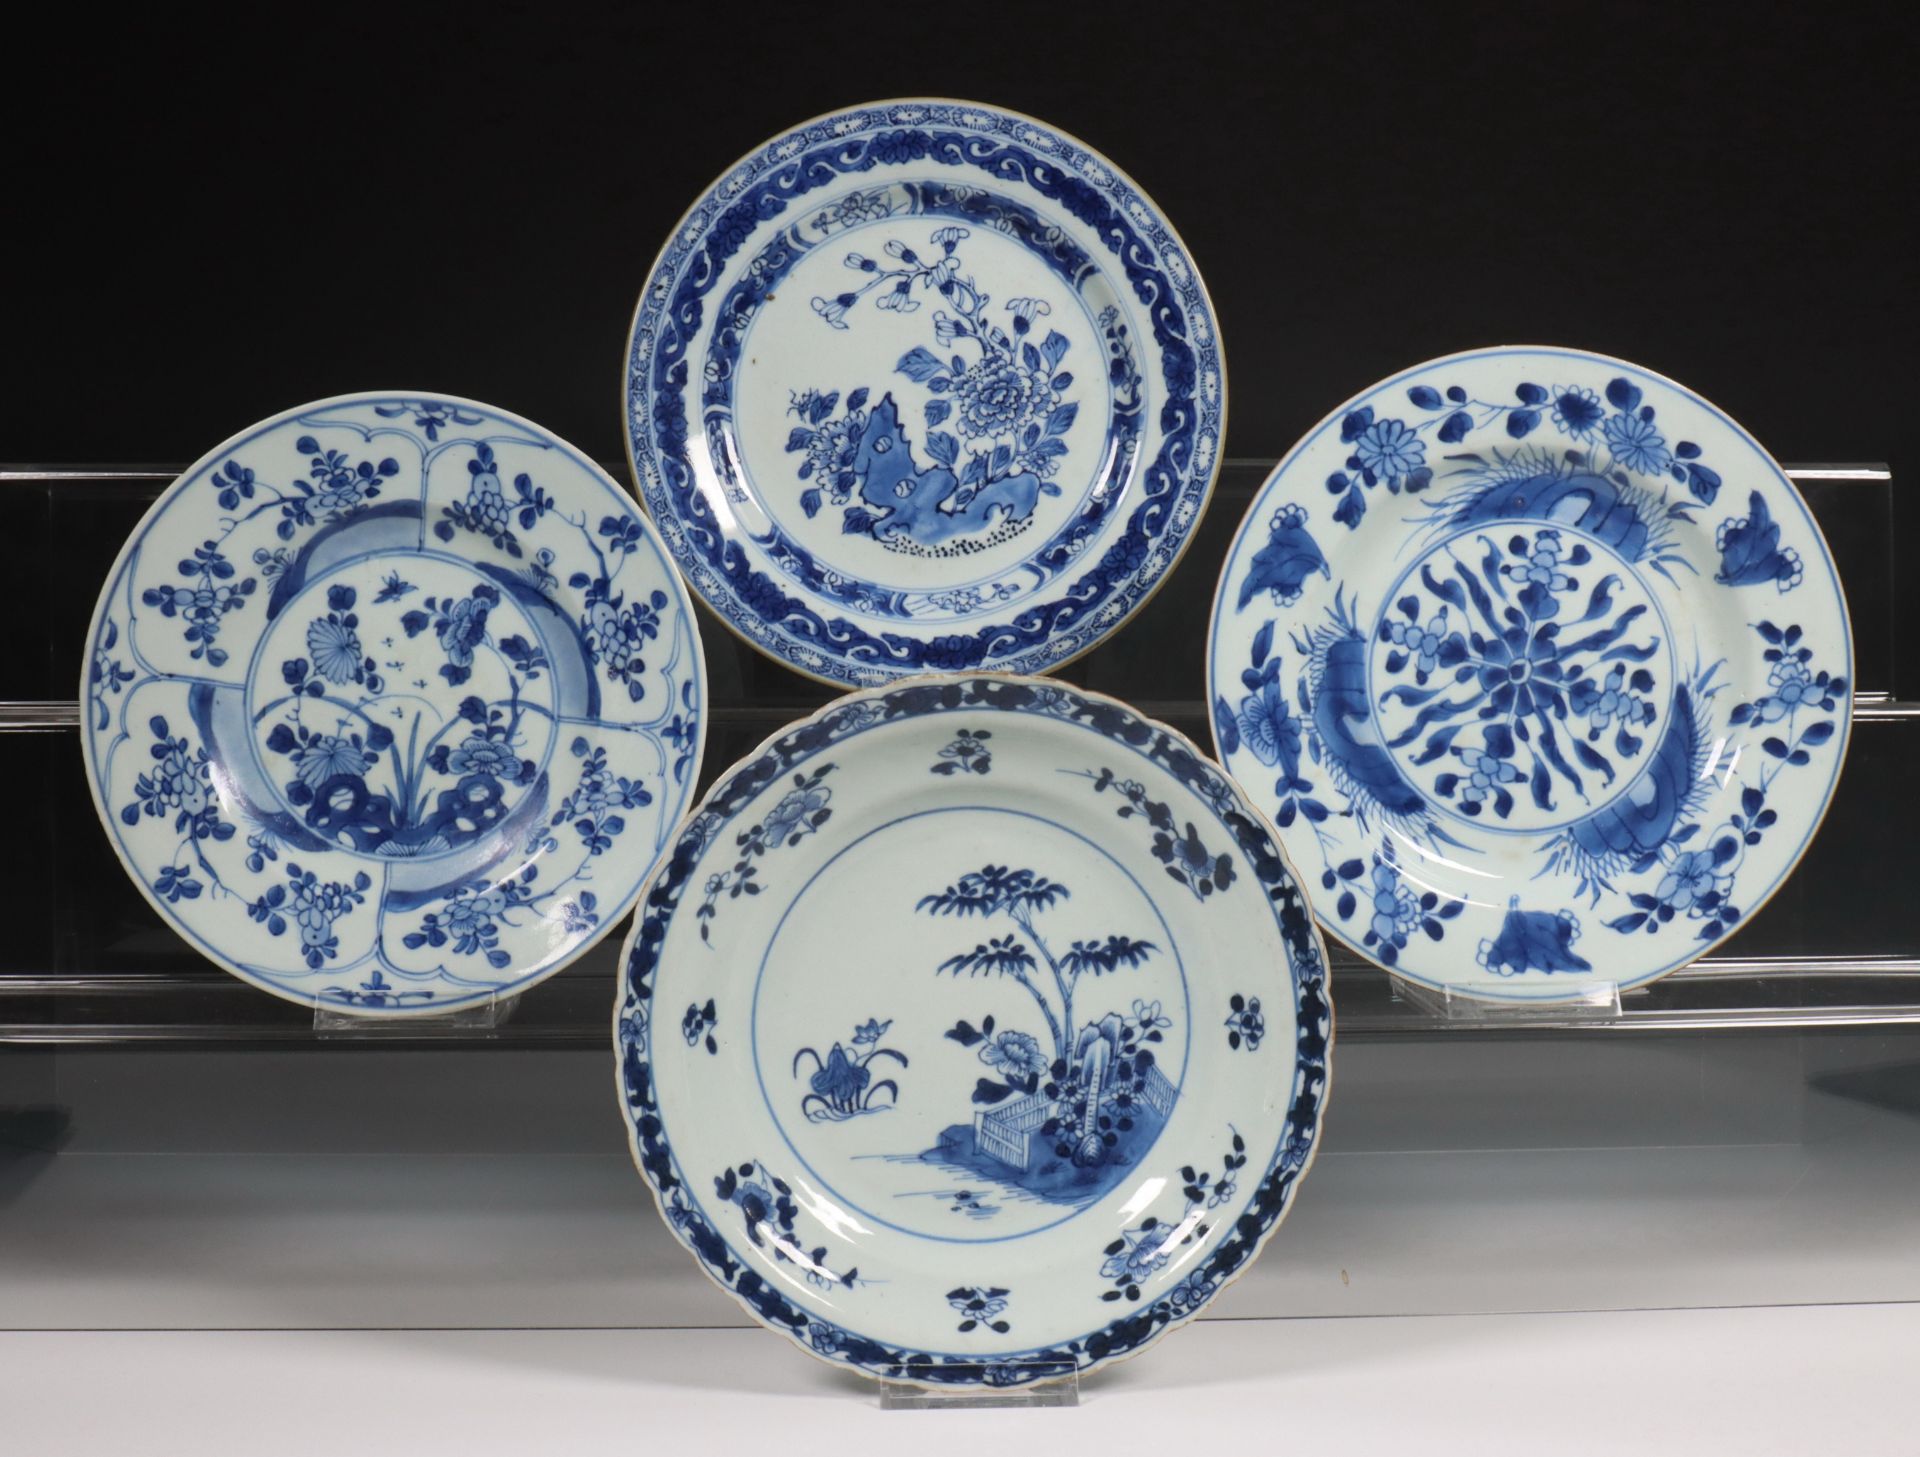 China, four blue and white porcelain plates, Qianlong period (1736-1795),